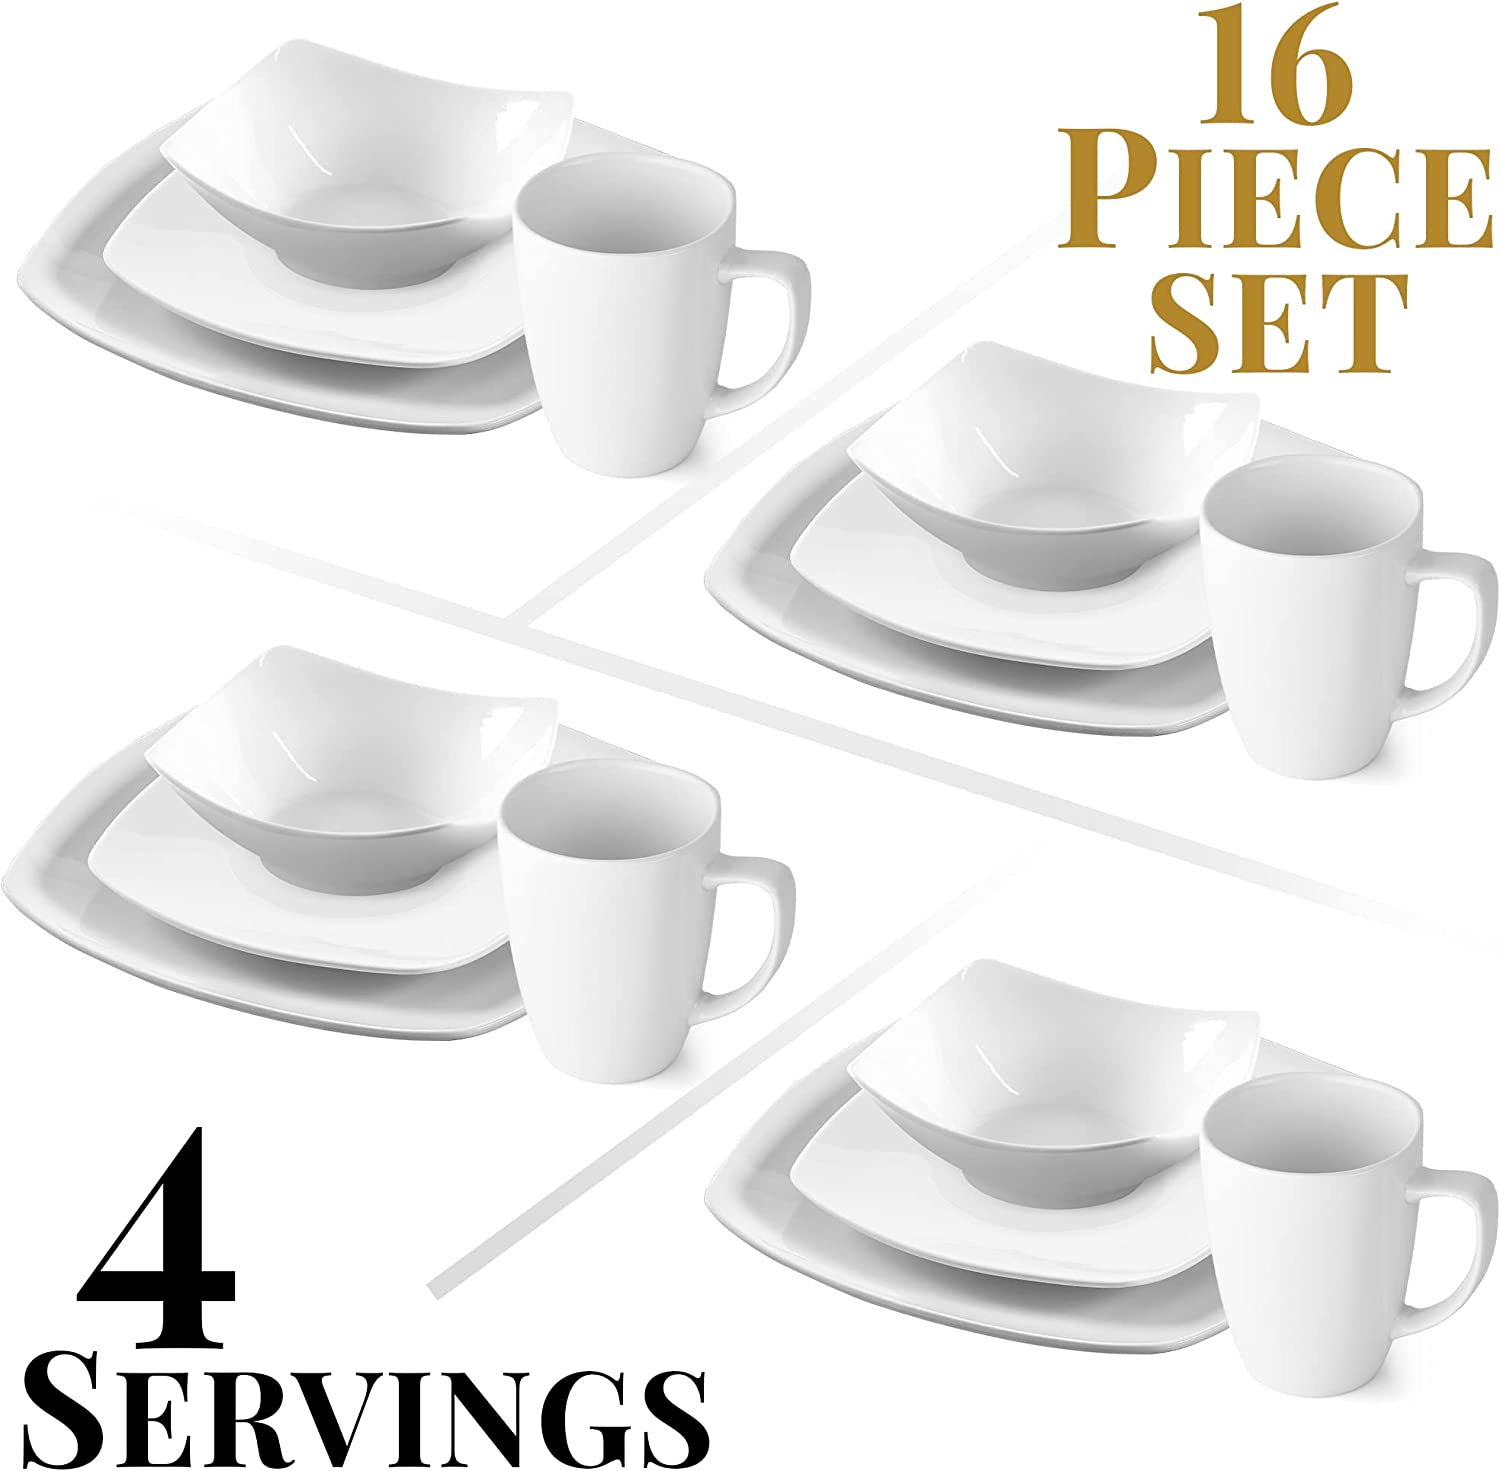 Zulay 16 Piece Dinnerware Sets – Porcelain White Dinnerware Set, Premium Quality Service For 4 – Includes 4 White Dishes and Plates Sets, 4 Soup Bowls, 4 Mugs and 2 Sponges